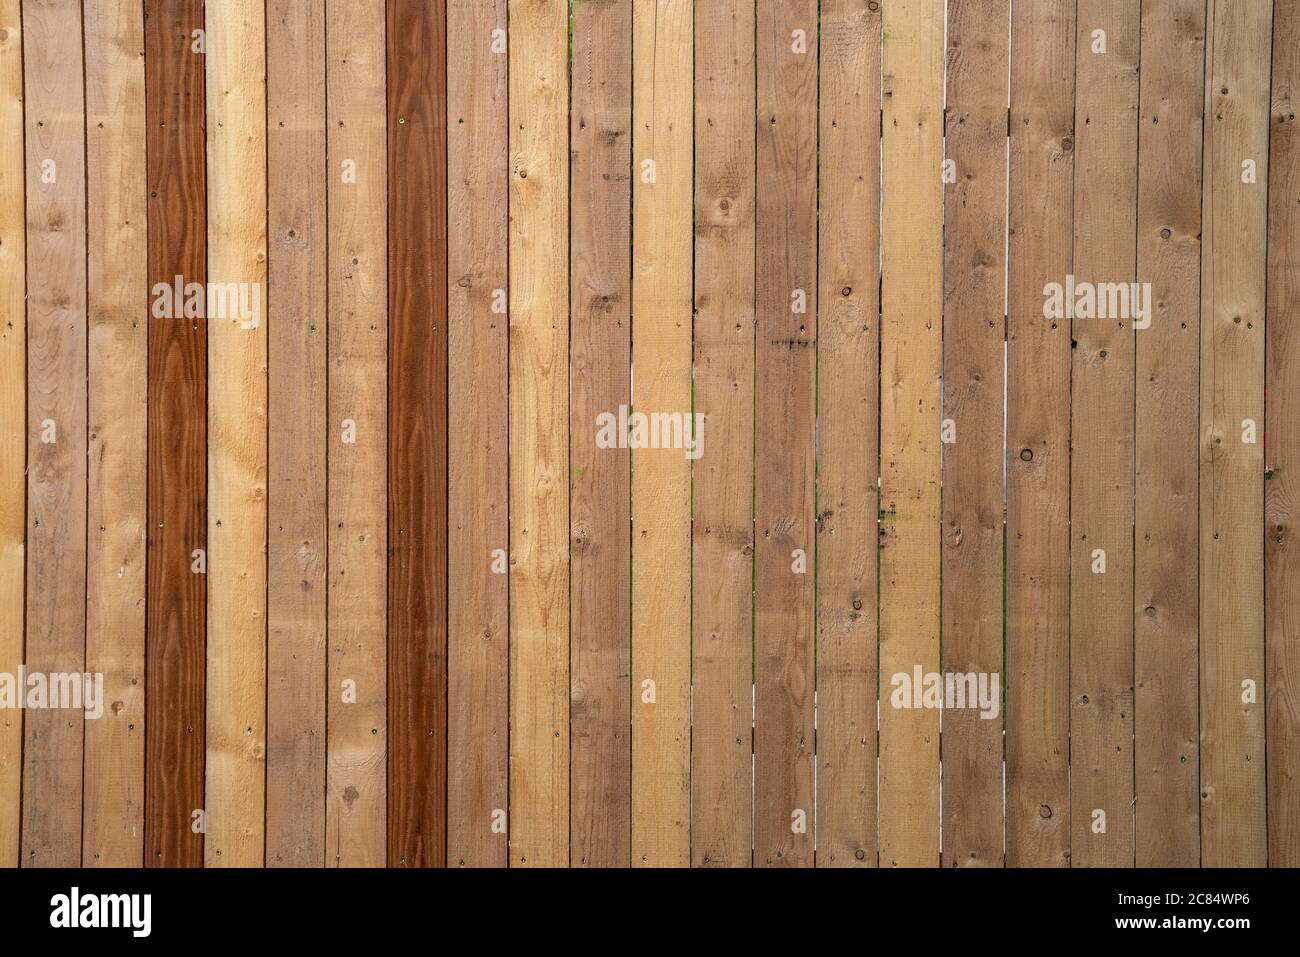 Beautiful beige-brown wooden background. Building sites visual protection Stock Photo